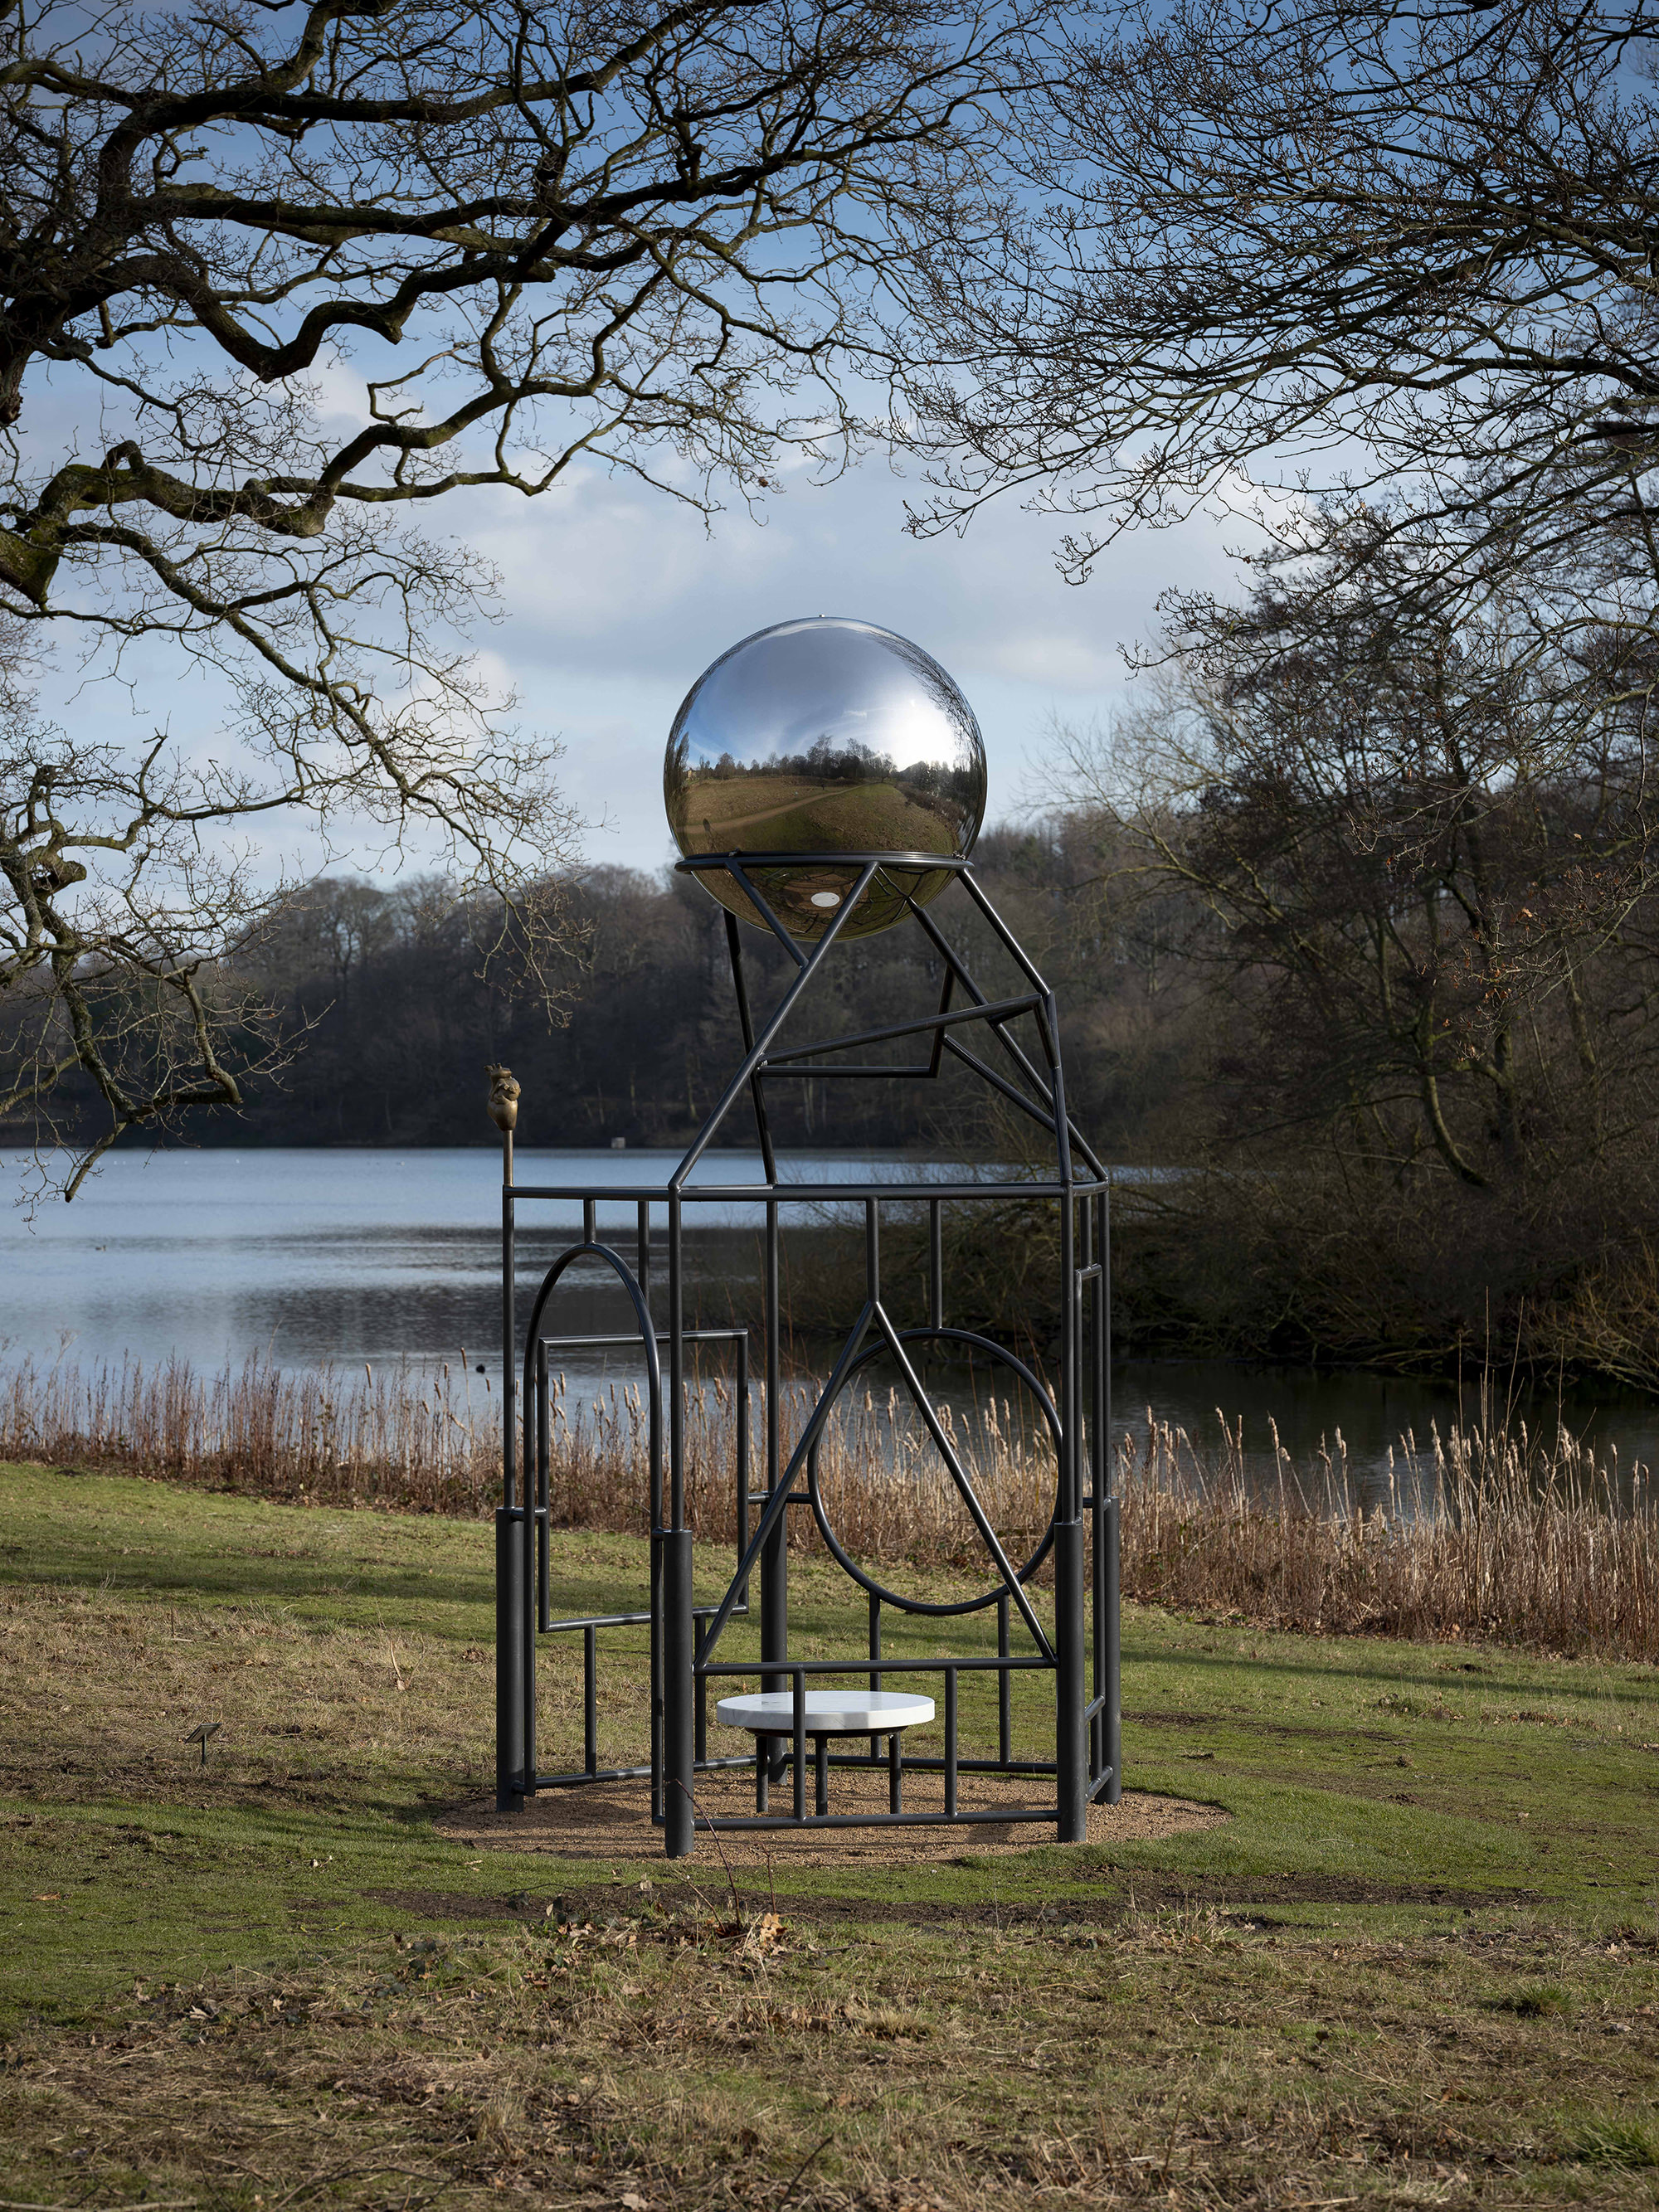 A metal frame sculpture with a silver ball at the top.